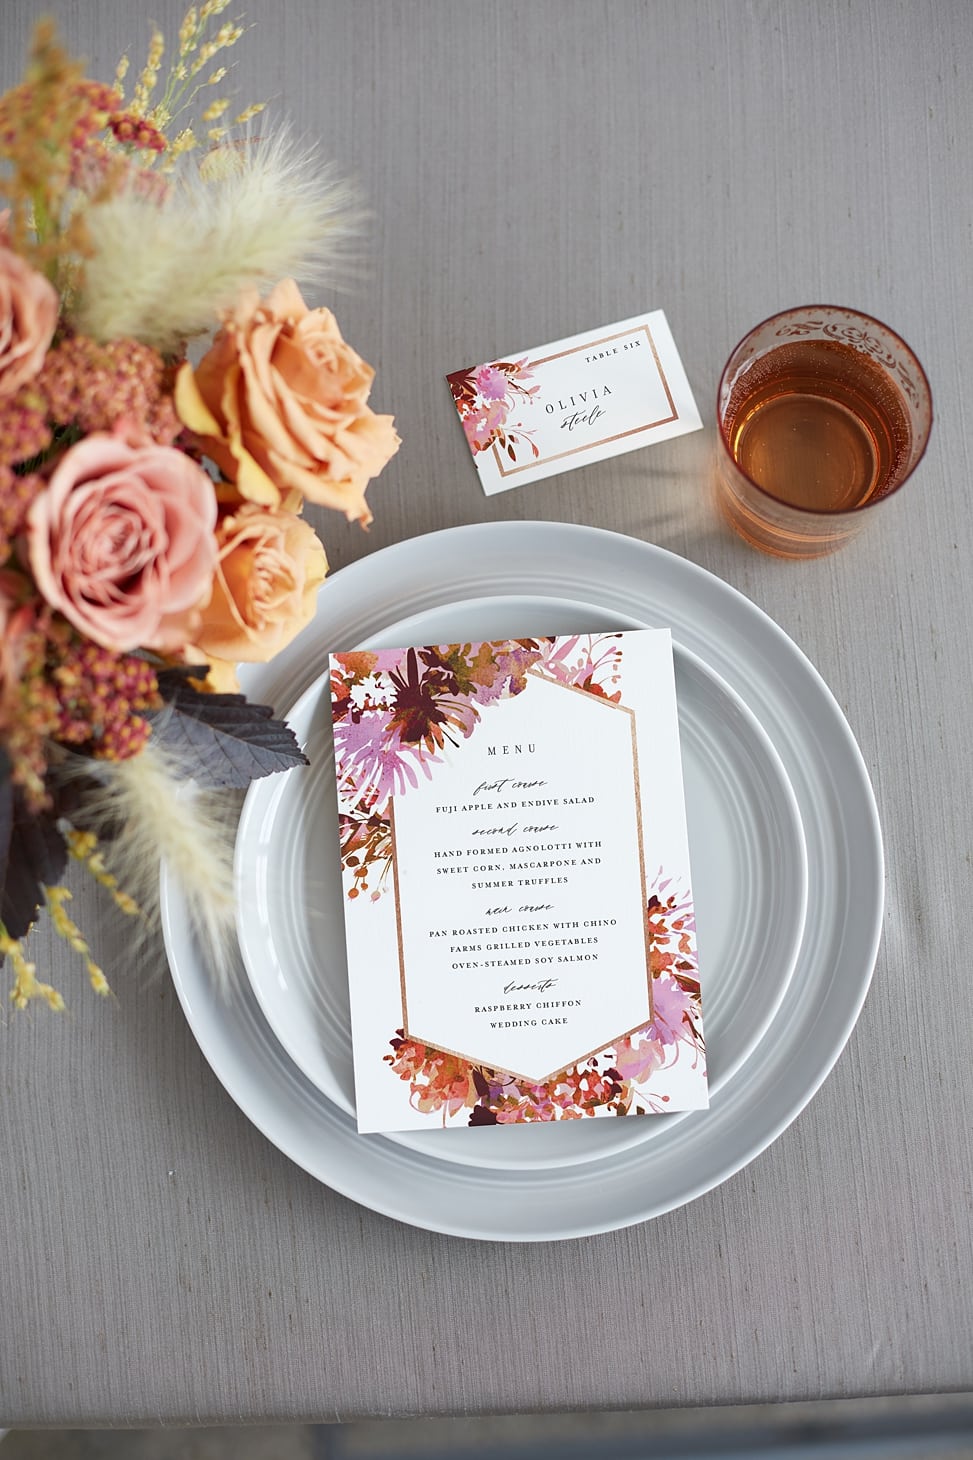 a floral menu and place setting from minted on a gray table cloth with gray plates and peach floral centerpiece